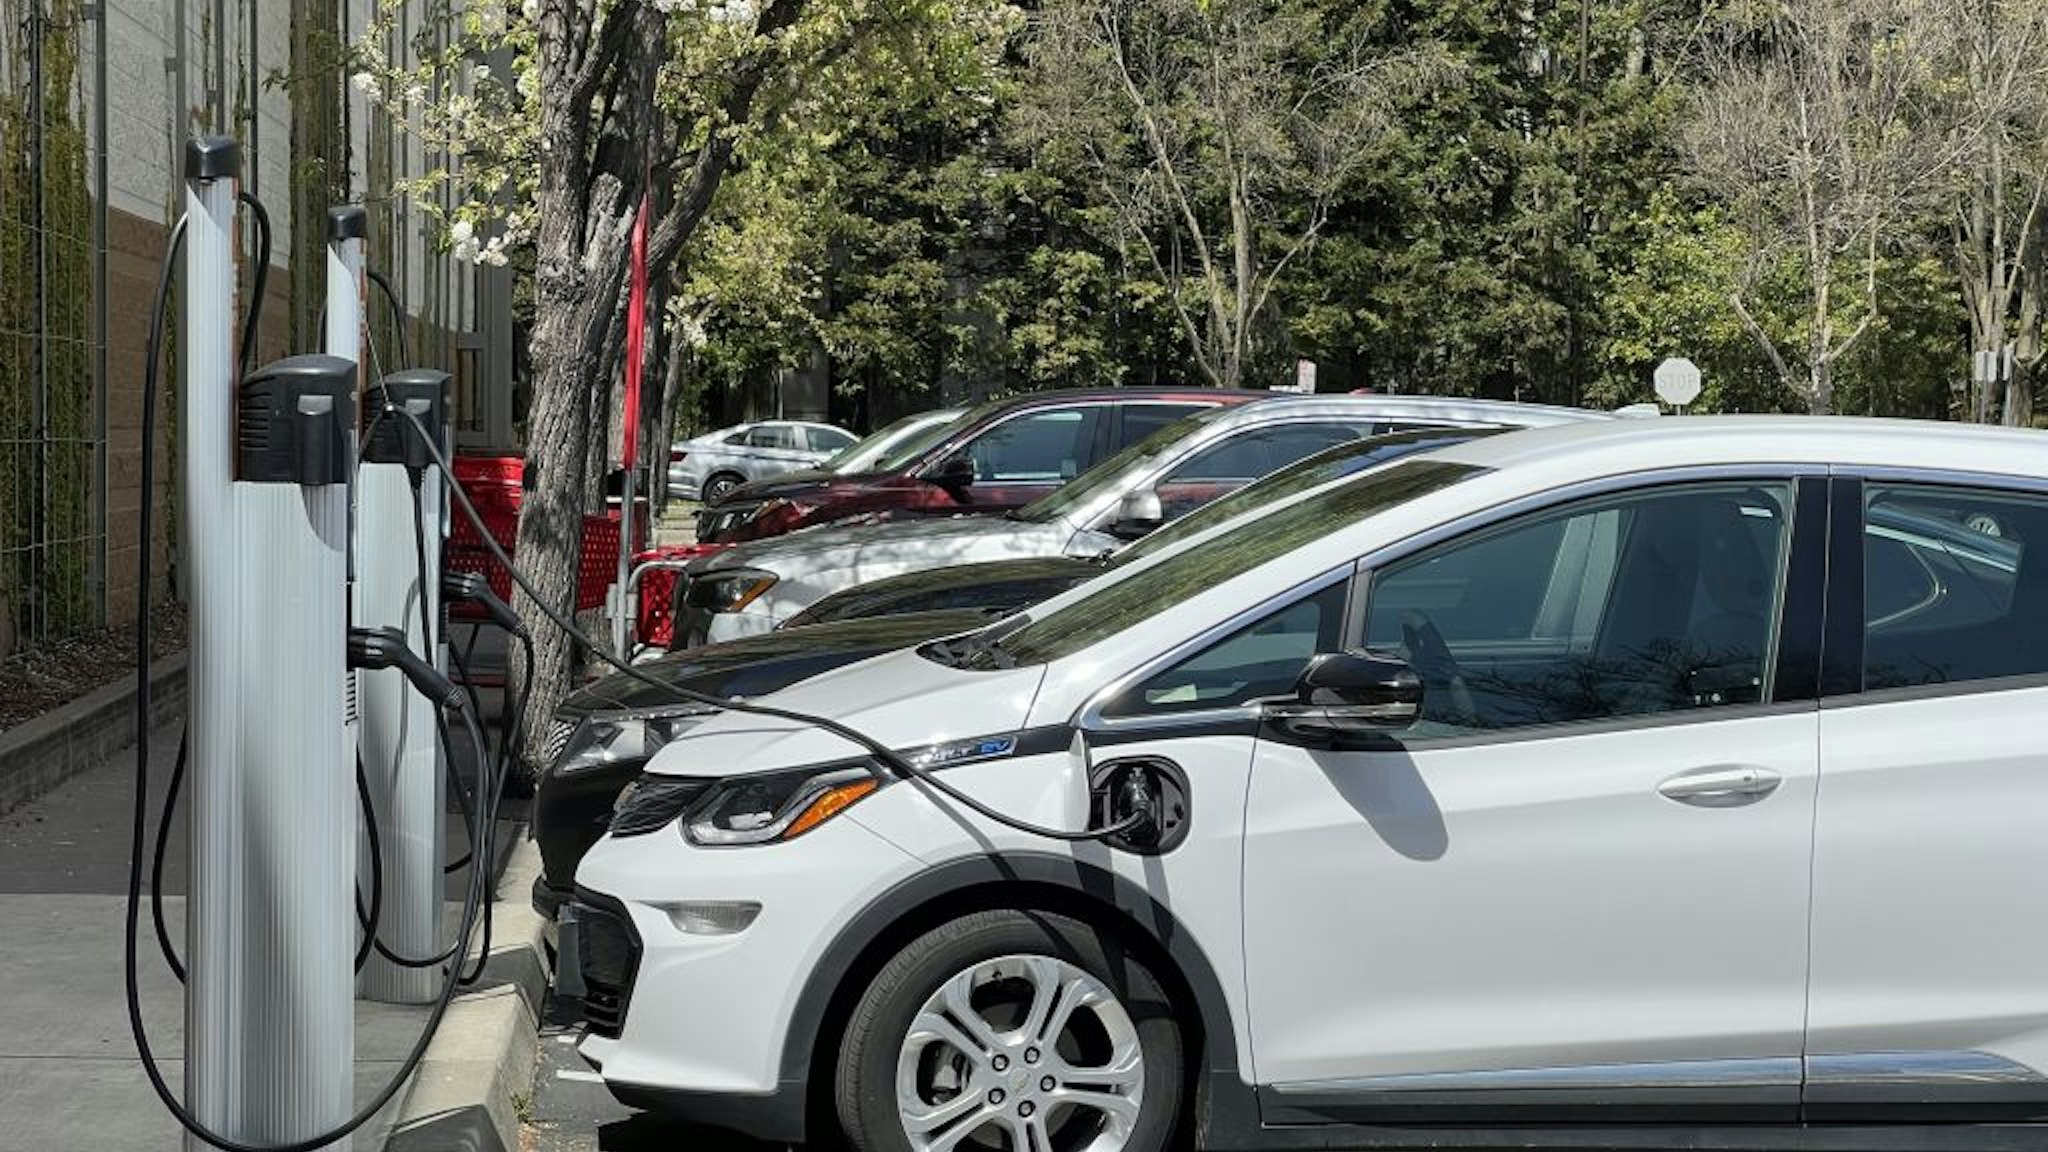 A row of electric vehicles is plugged in and charging at public electric vehicle charging stations in San Ramon, California, April 5, 2023. (Photo by Smith Collection/Gado/Getty Images)